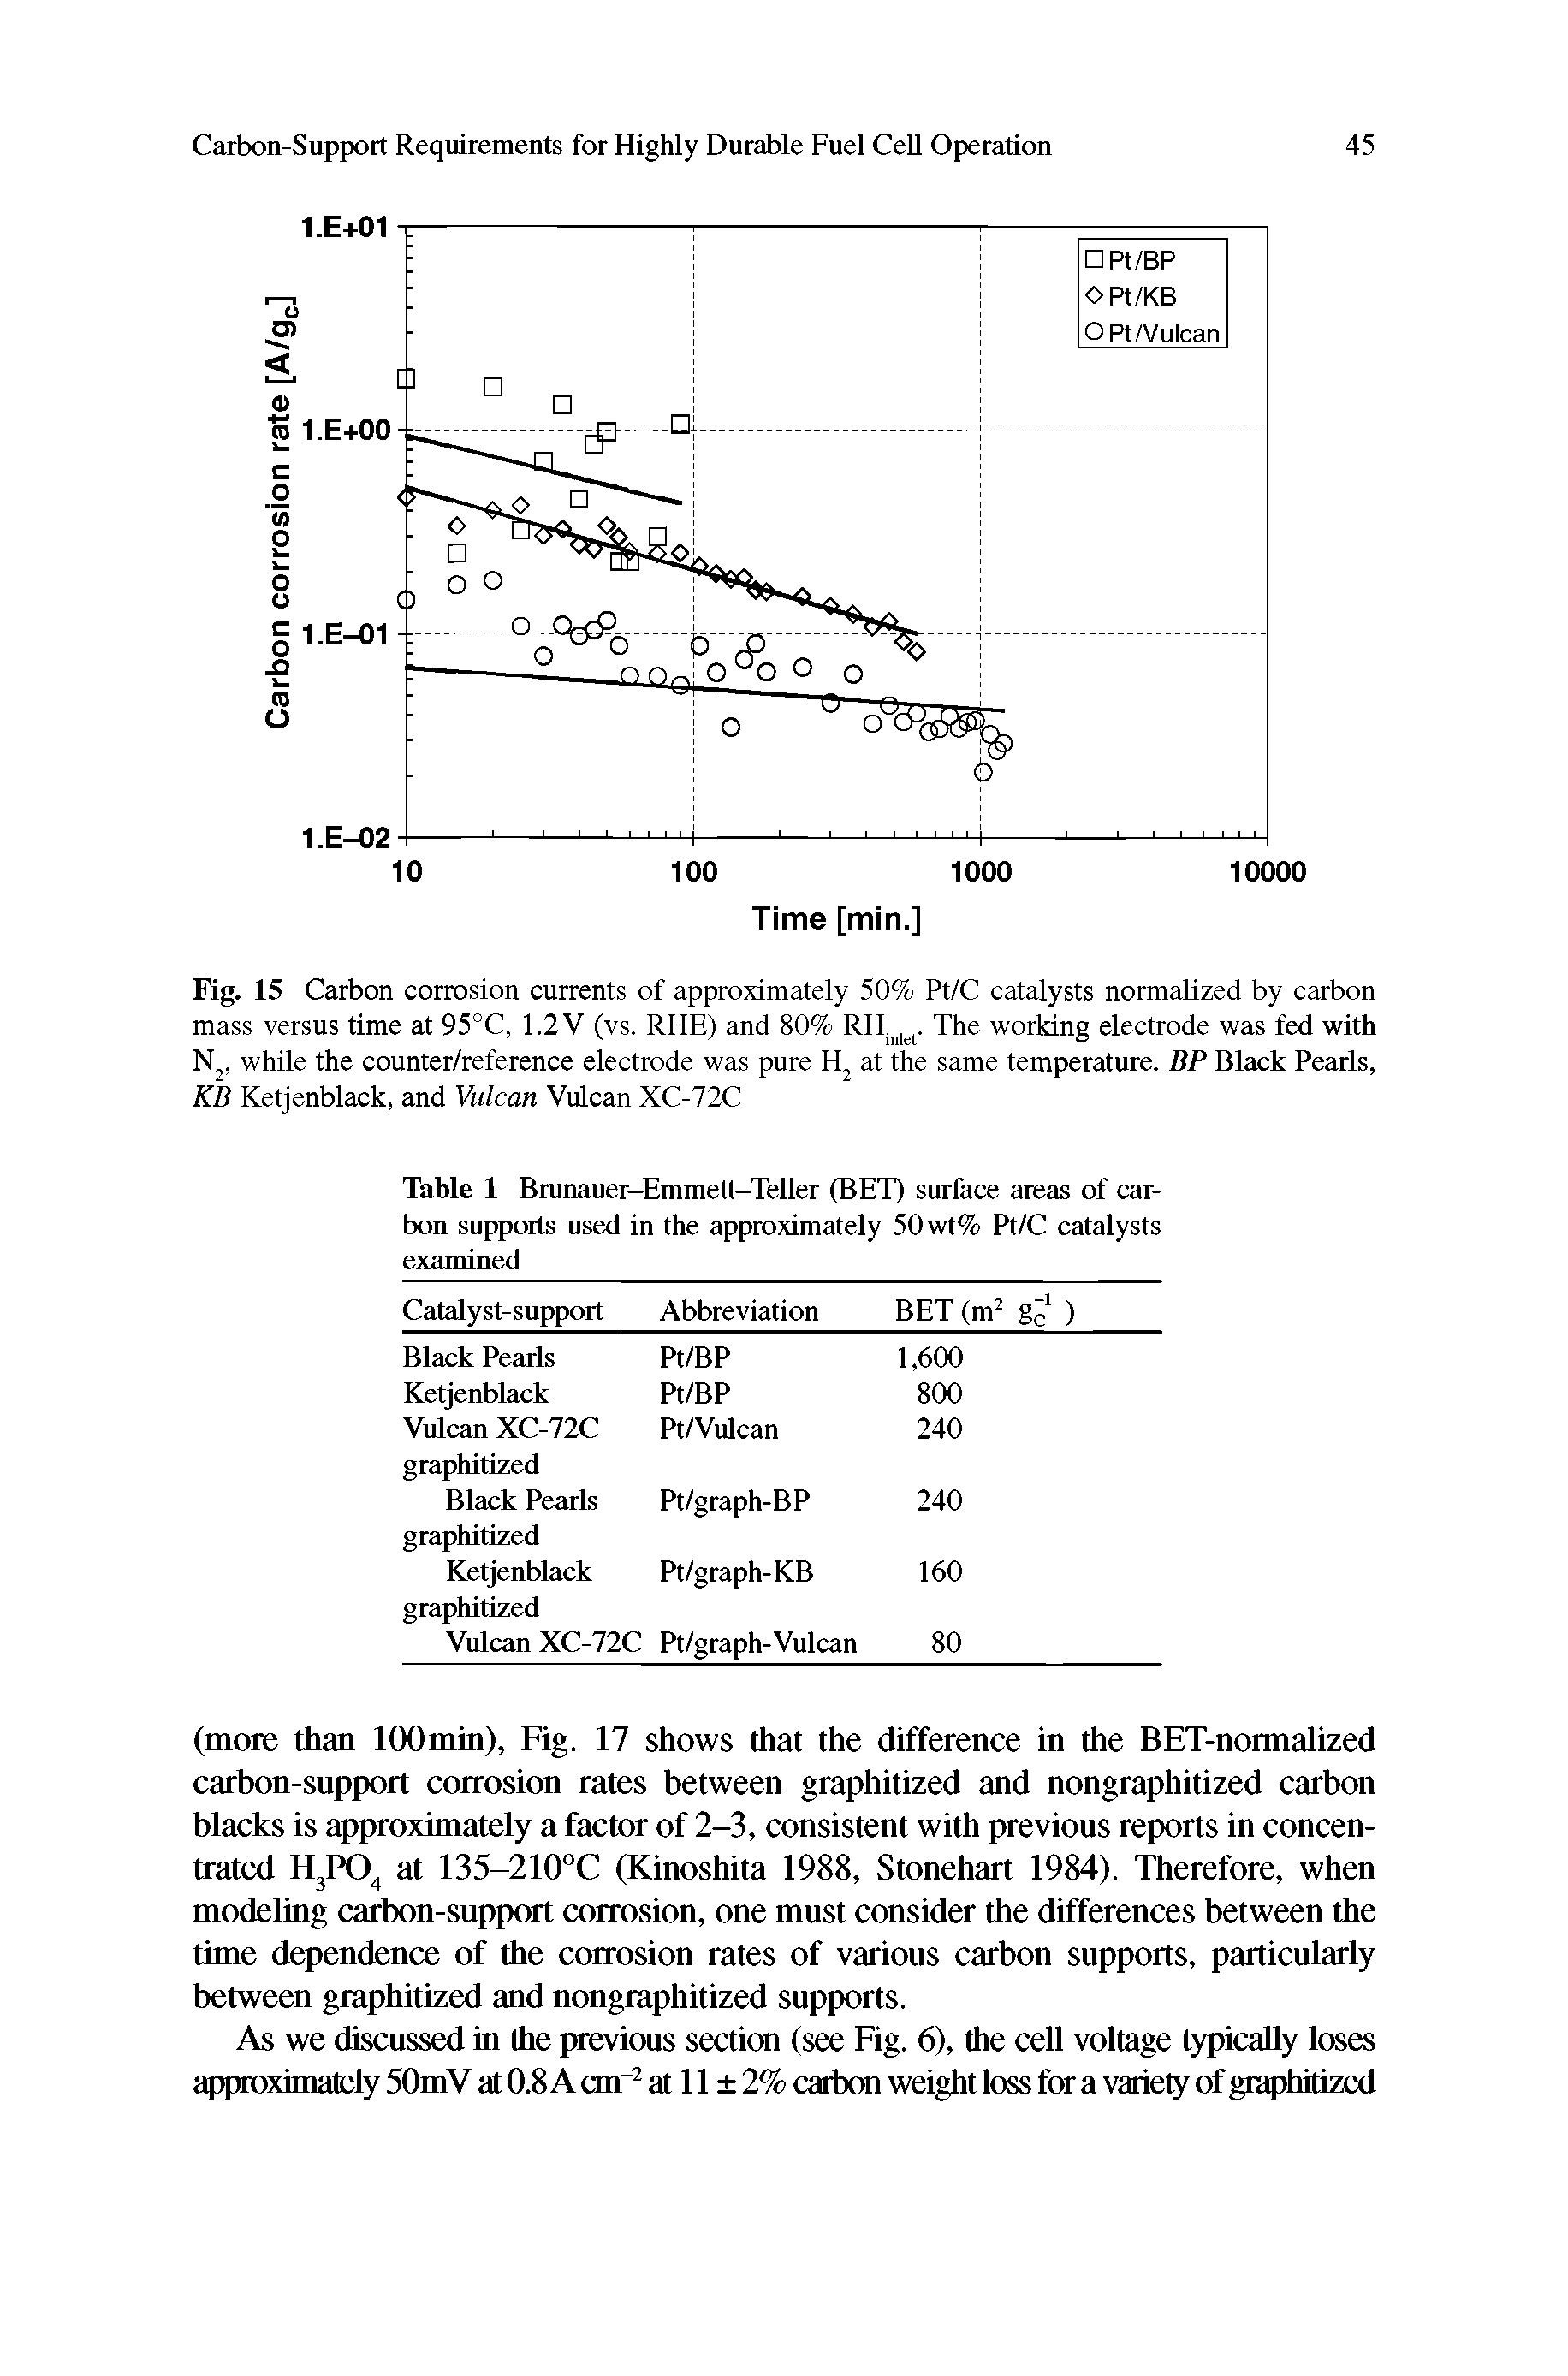 Fig. 15 Carbon corrosion currents of approximately 50% Pt/C catalysts normalized by carbon mass versus time at 95°C, 1.2 V (vs. RHE) and 80% RH. i. The working electrode was fed with Nj, while the counter/reference electrode was pure at the same temperature. BP Black Pearls, KB Ketjenblack, and Vulcan Vulcan XC-72C...